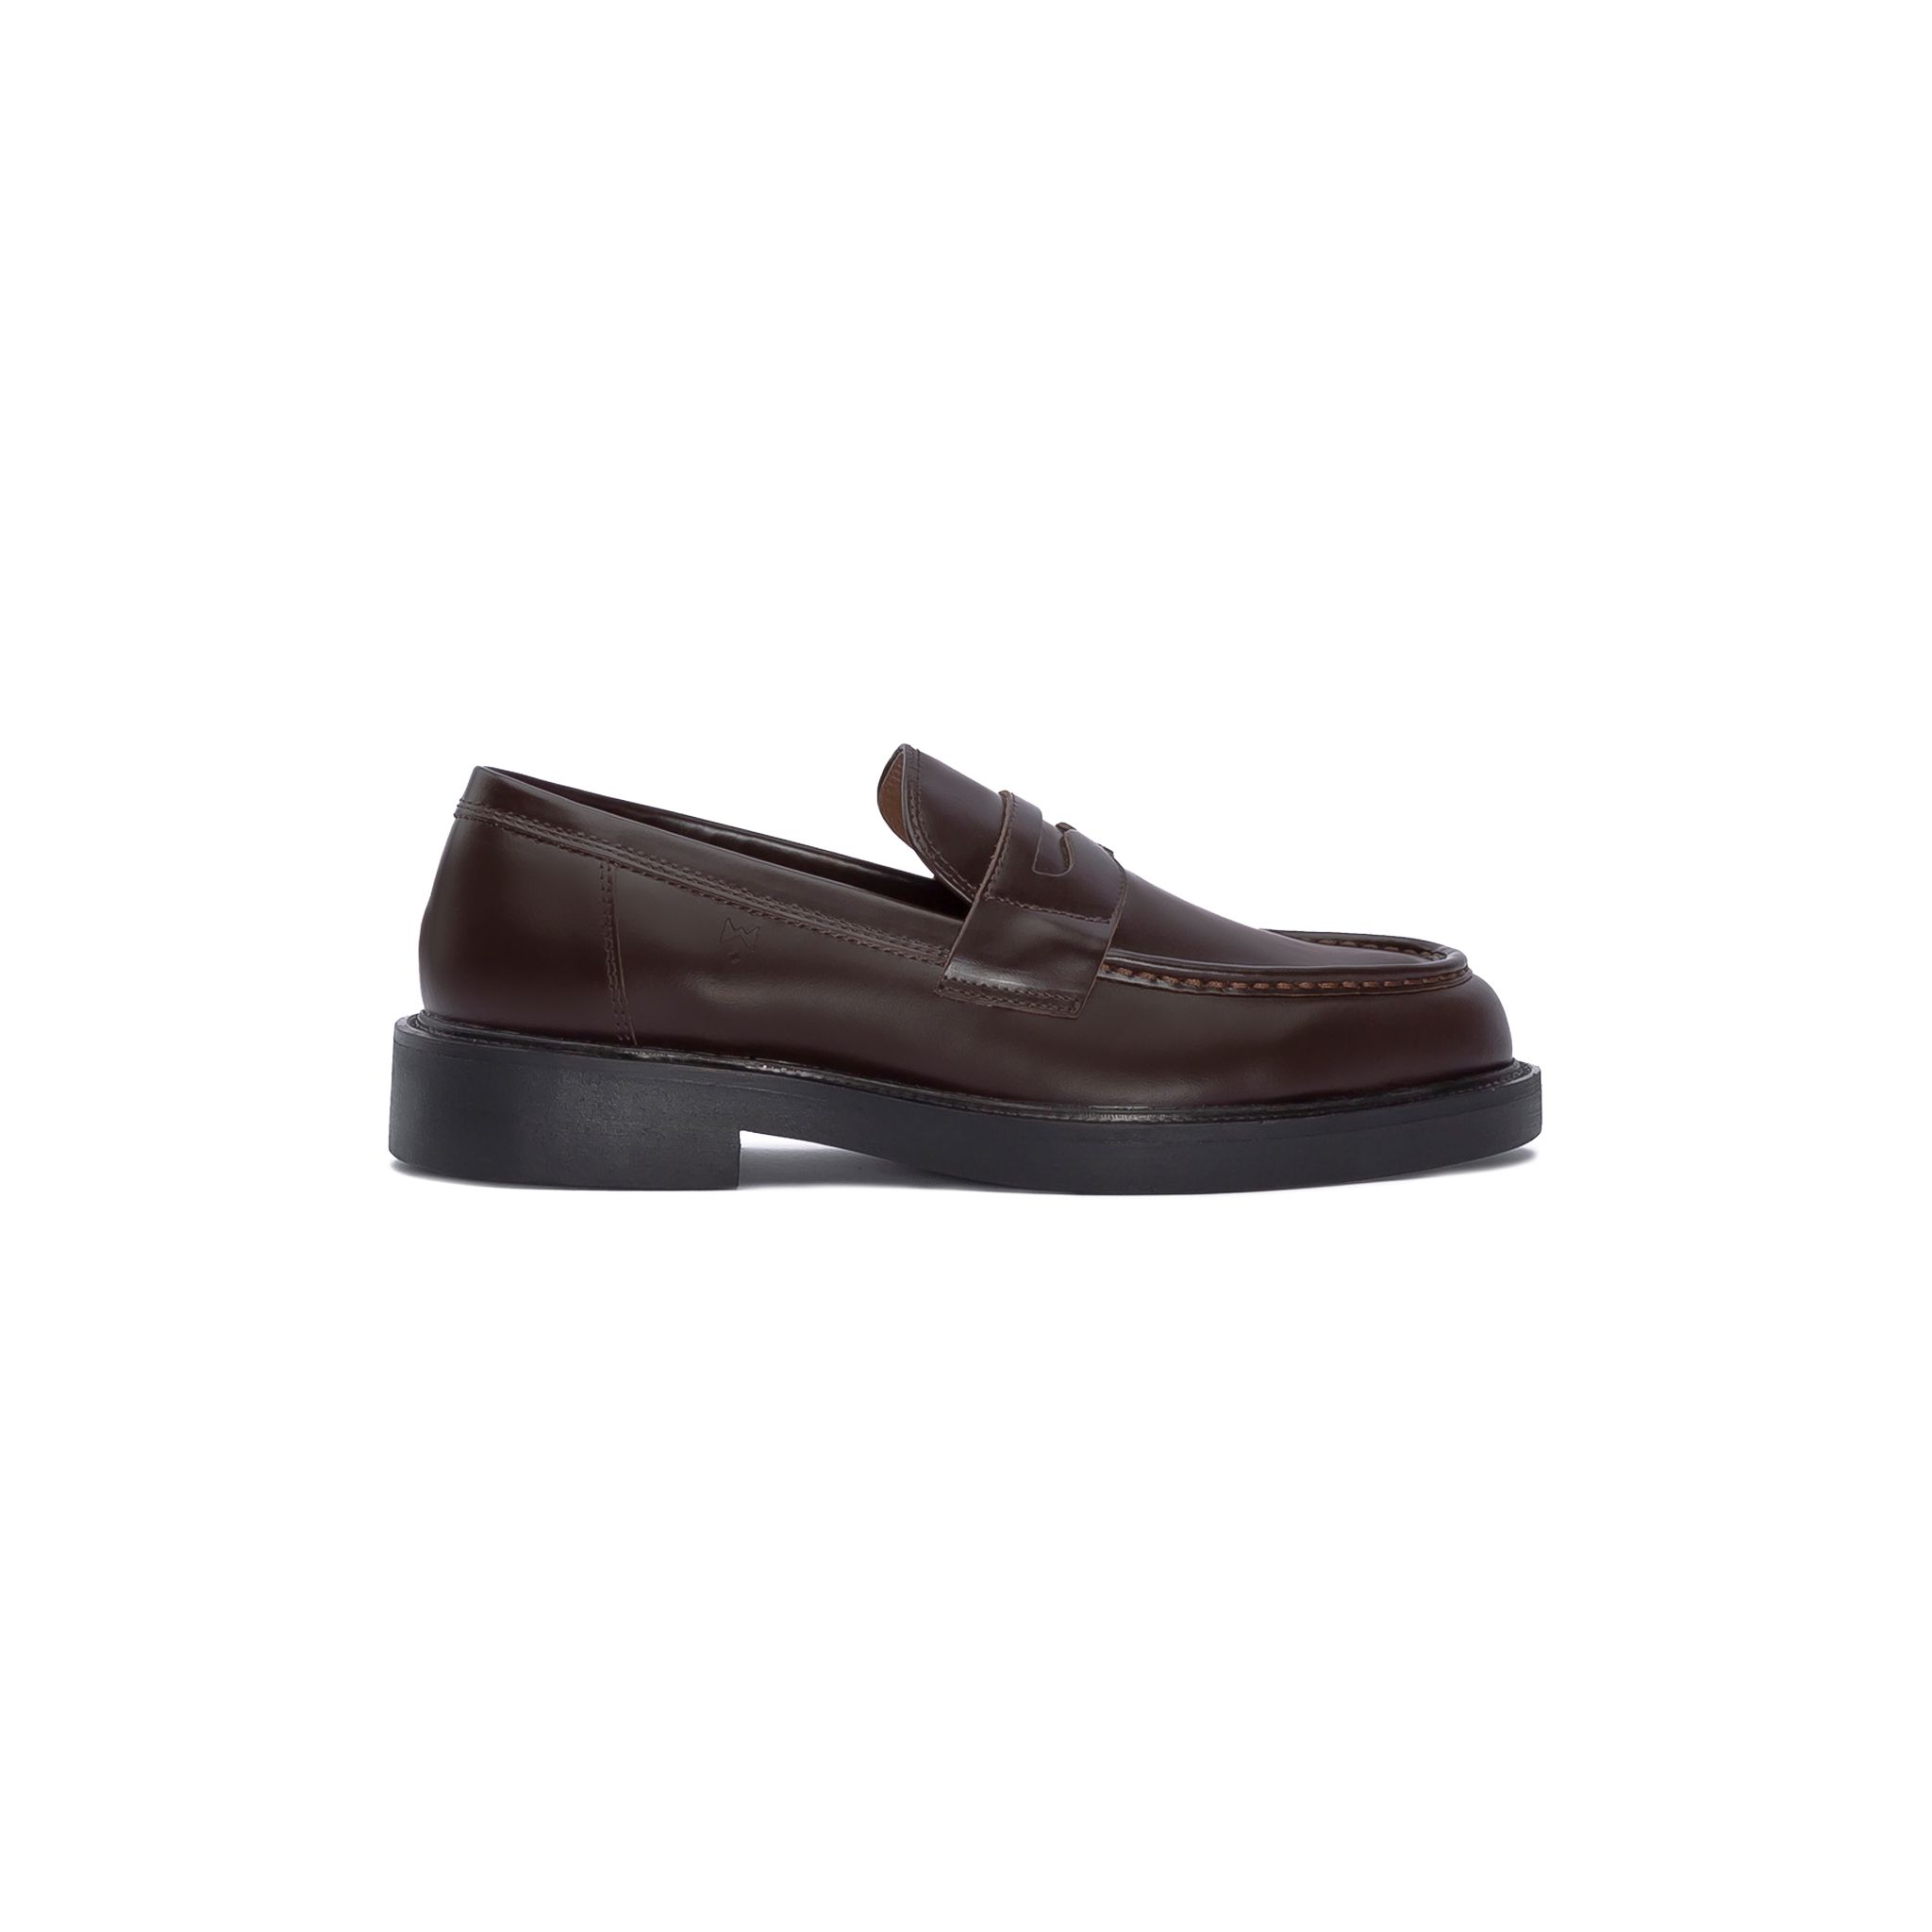  THE SEAN LADY WOLF PENNY LOAFER - BROWN 